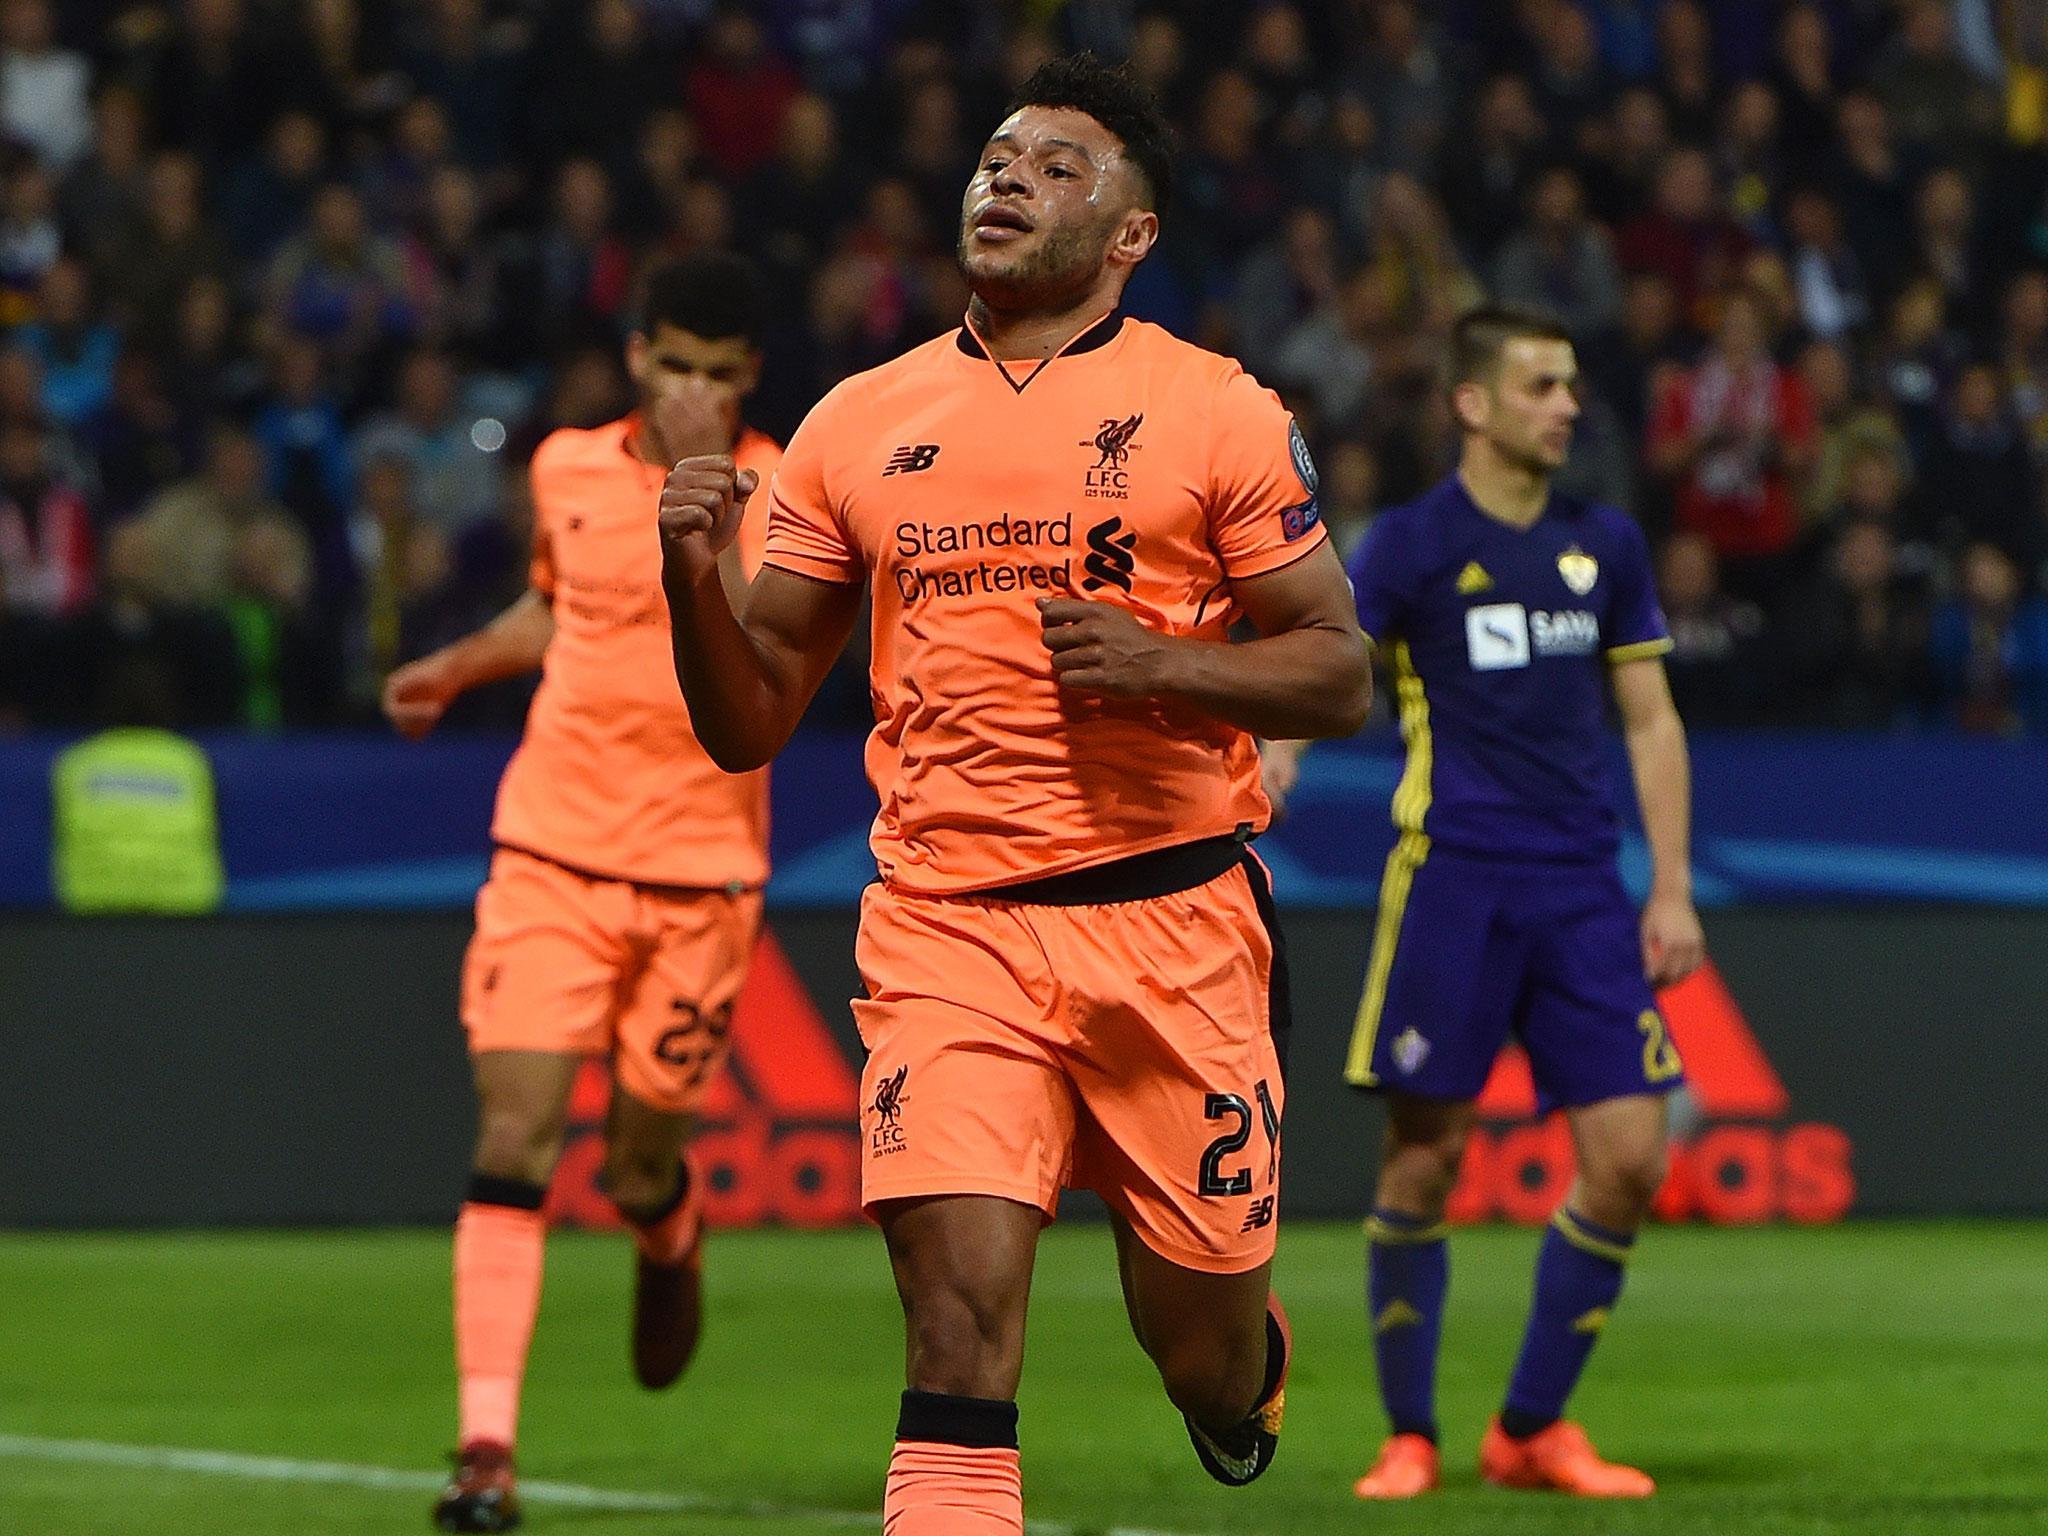 Alex Oxlade-Chamberlain scored his first Liverpool goal in Slovenia